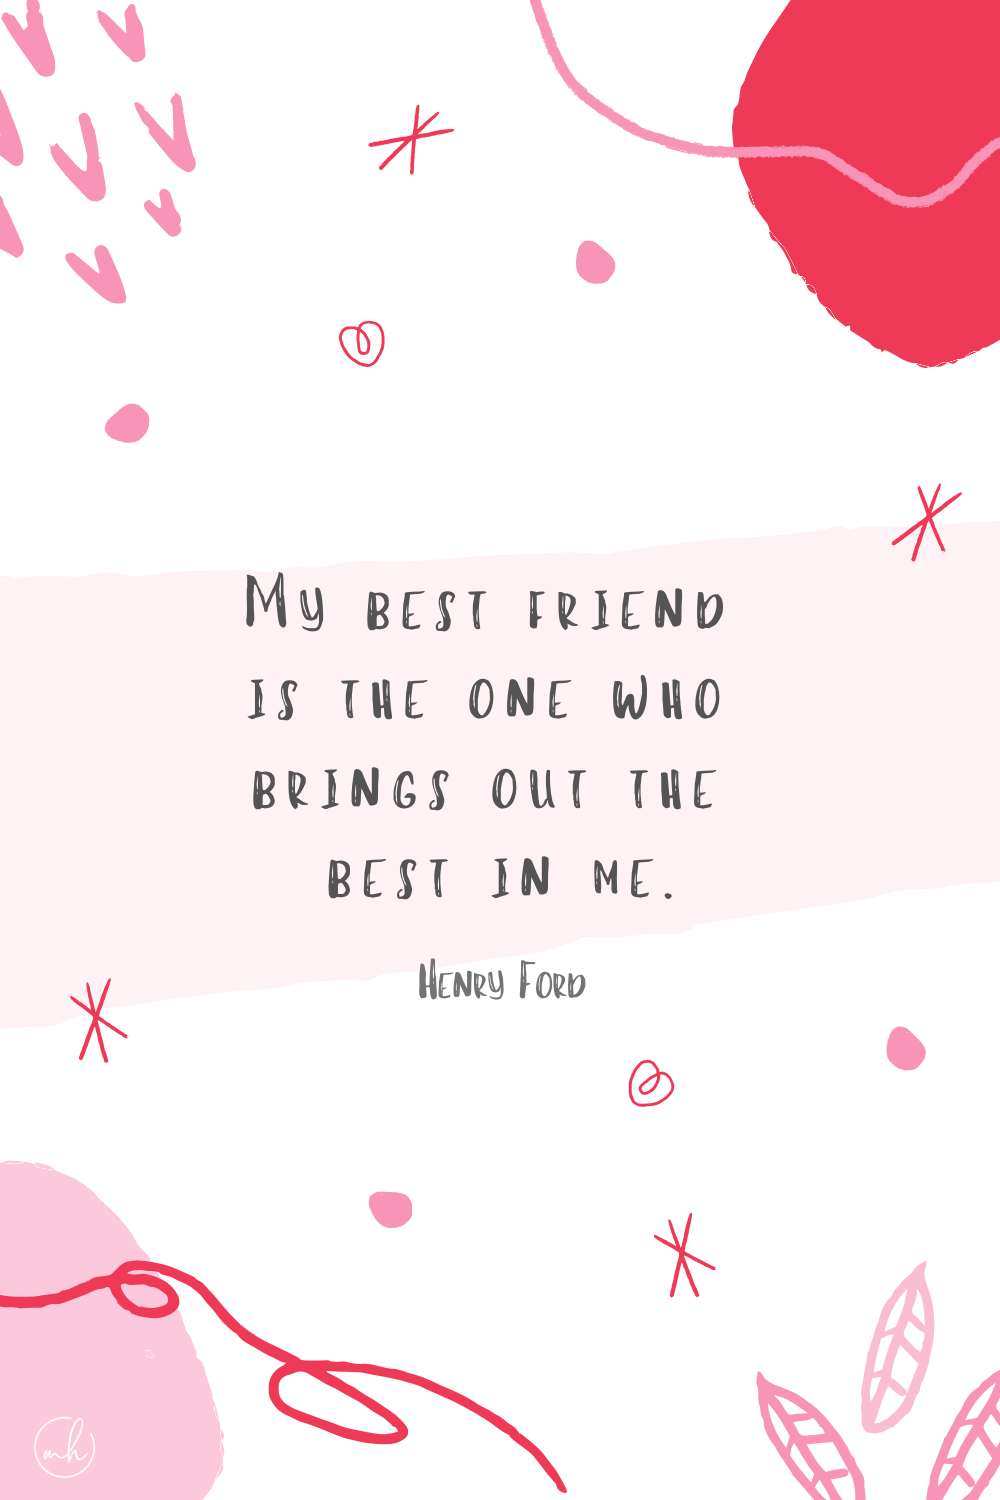 “My best friend is the one who brings out the best in me.” - Henry Ford